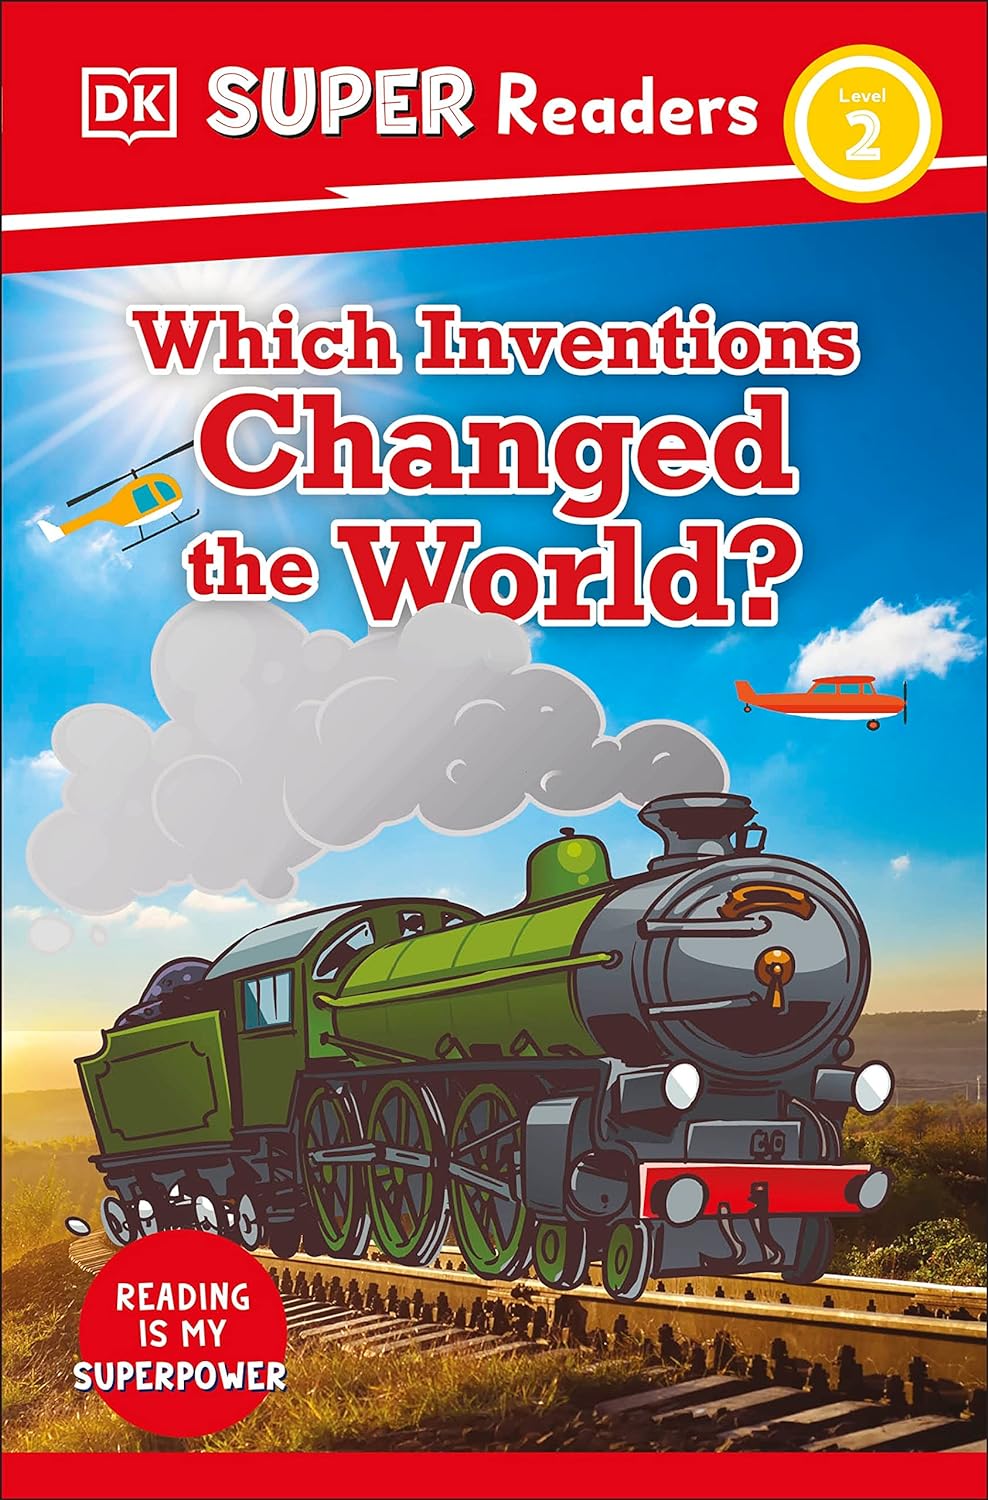 DK Super Readers Level 2 : Which Inventions Changed the World?